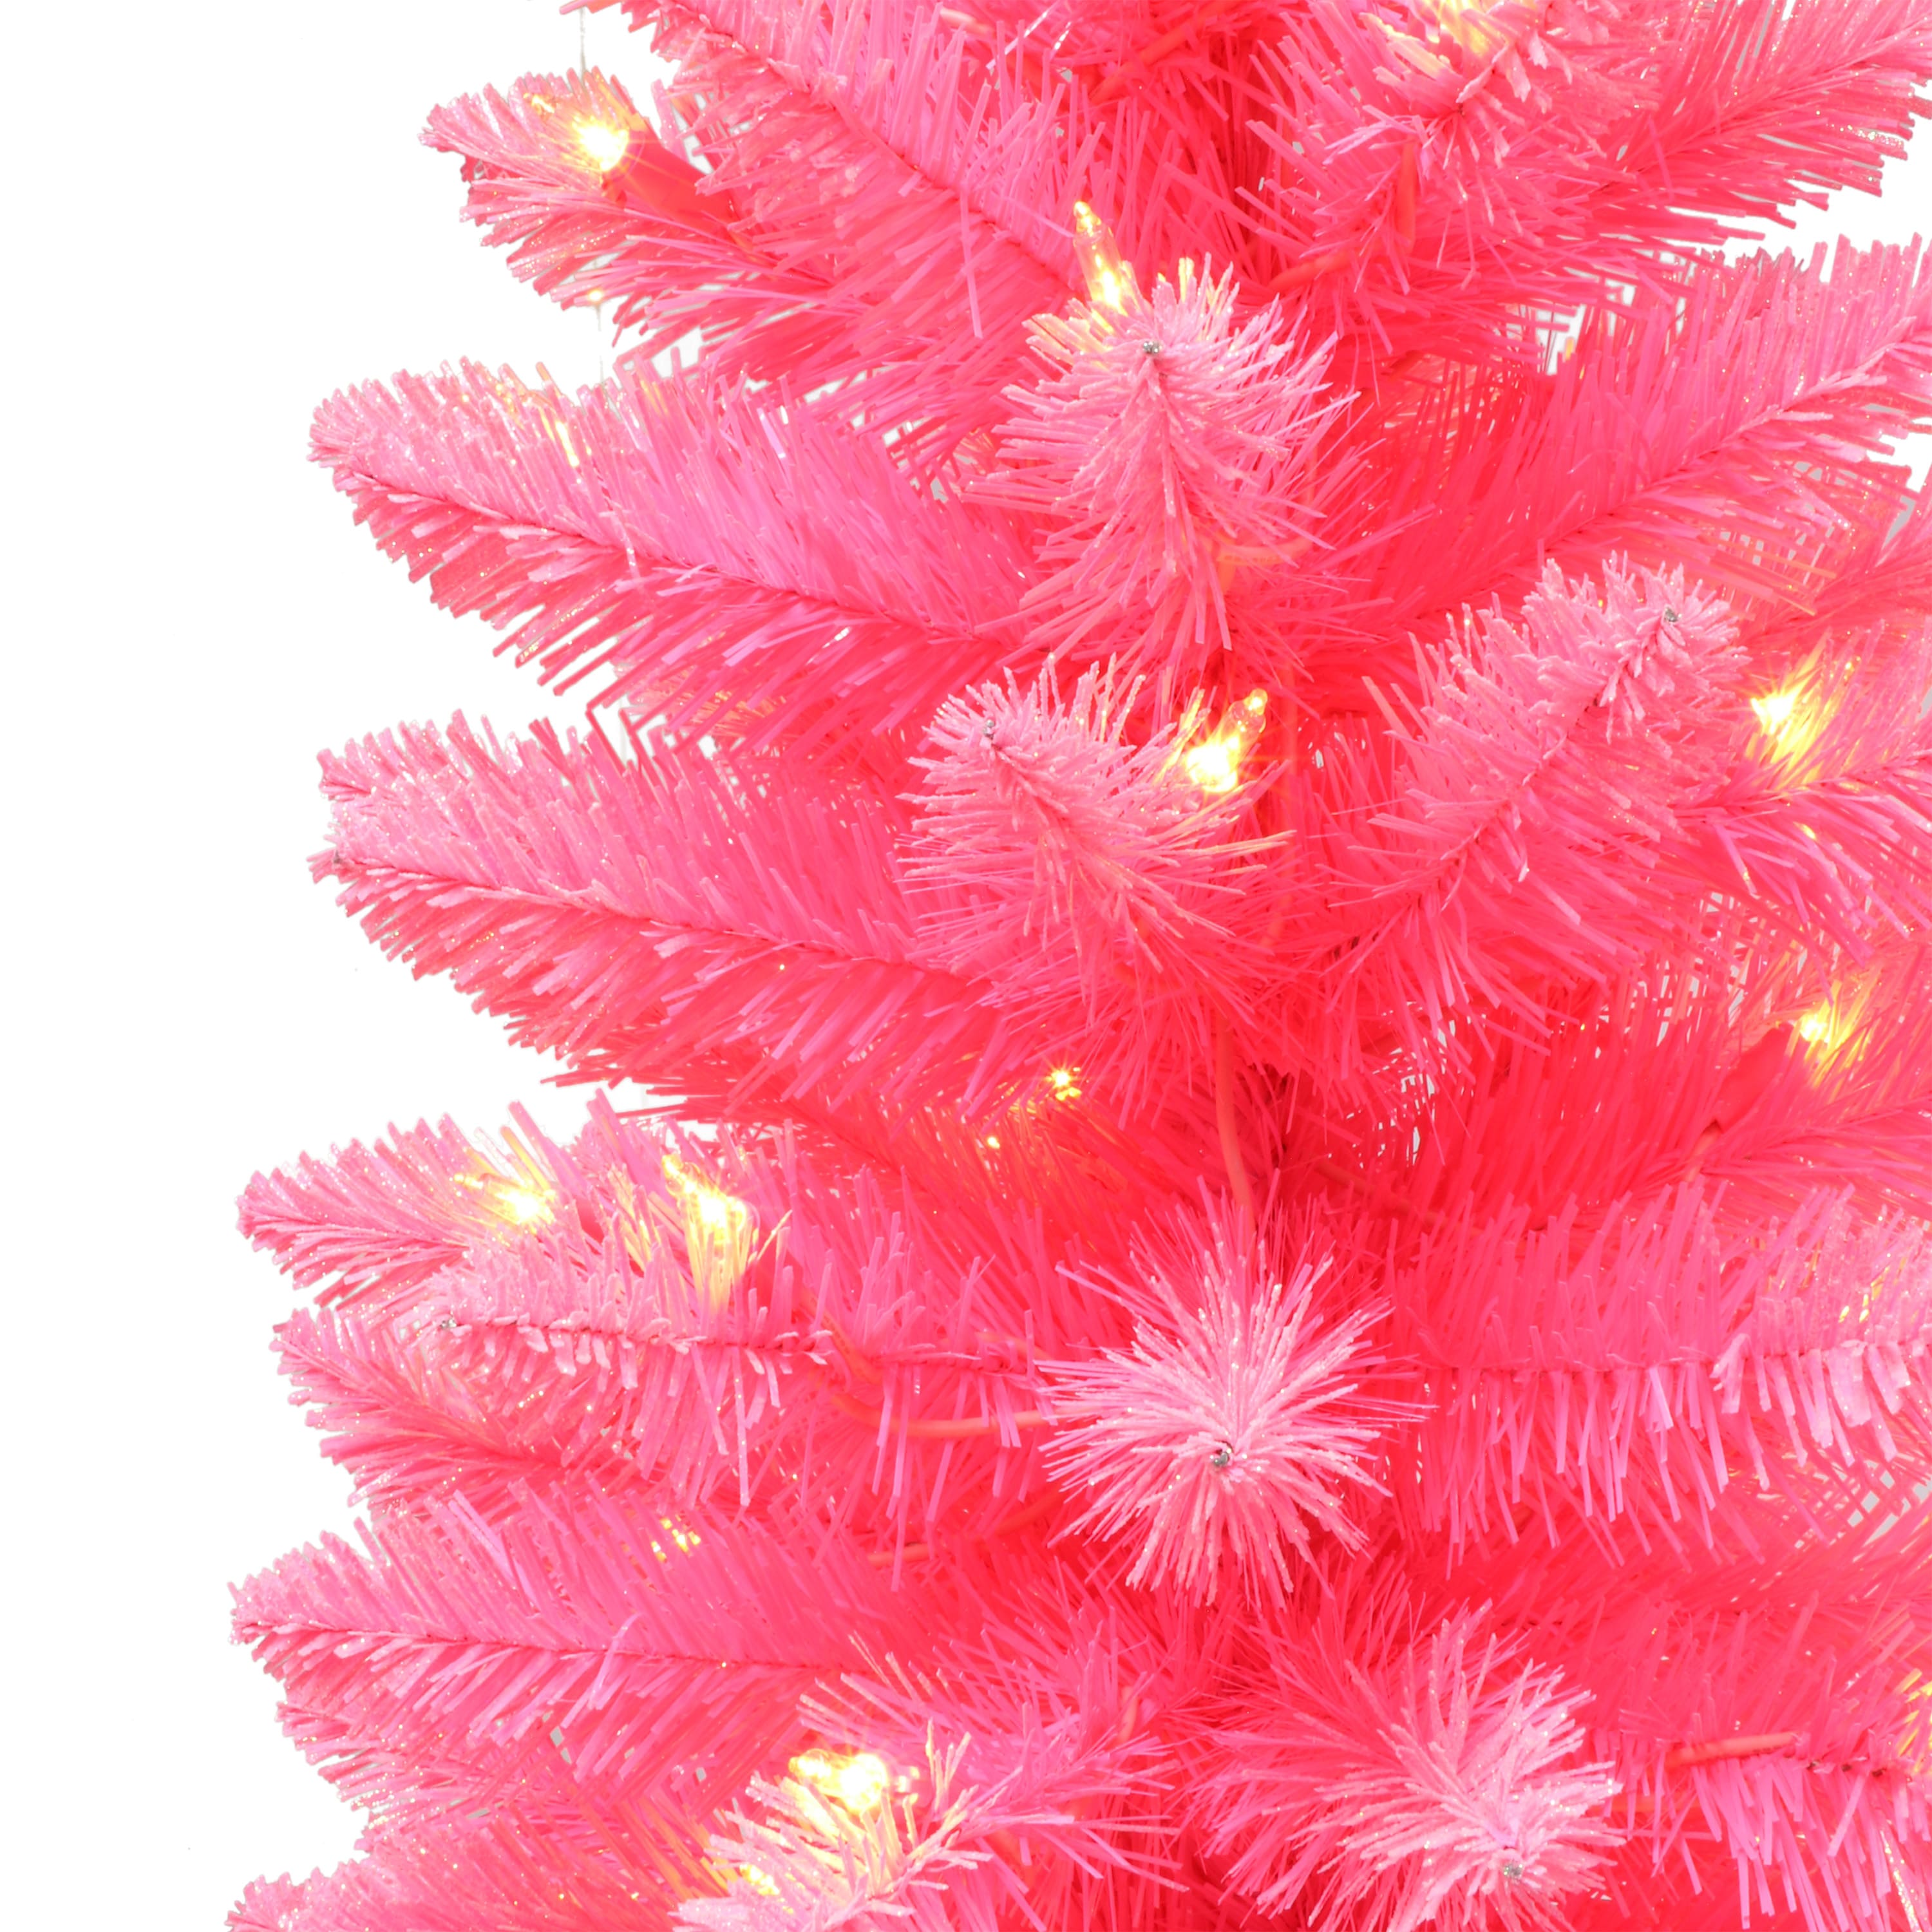 6 Pack: 3ft. Pre-Lit Pink Artificial Christmas Tree, Clear LED Lights